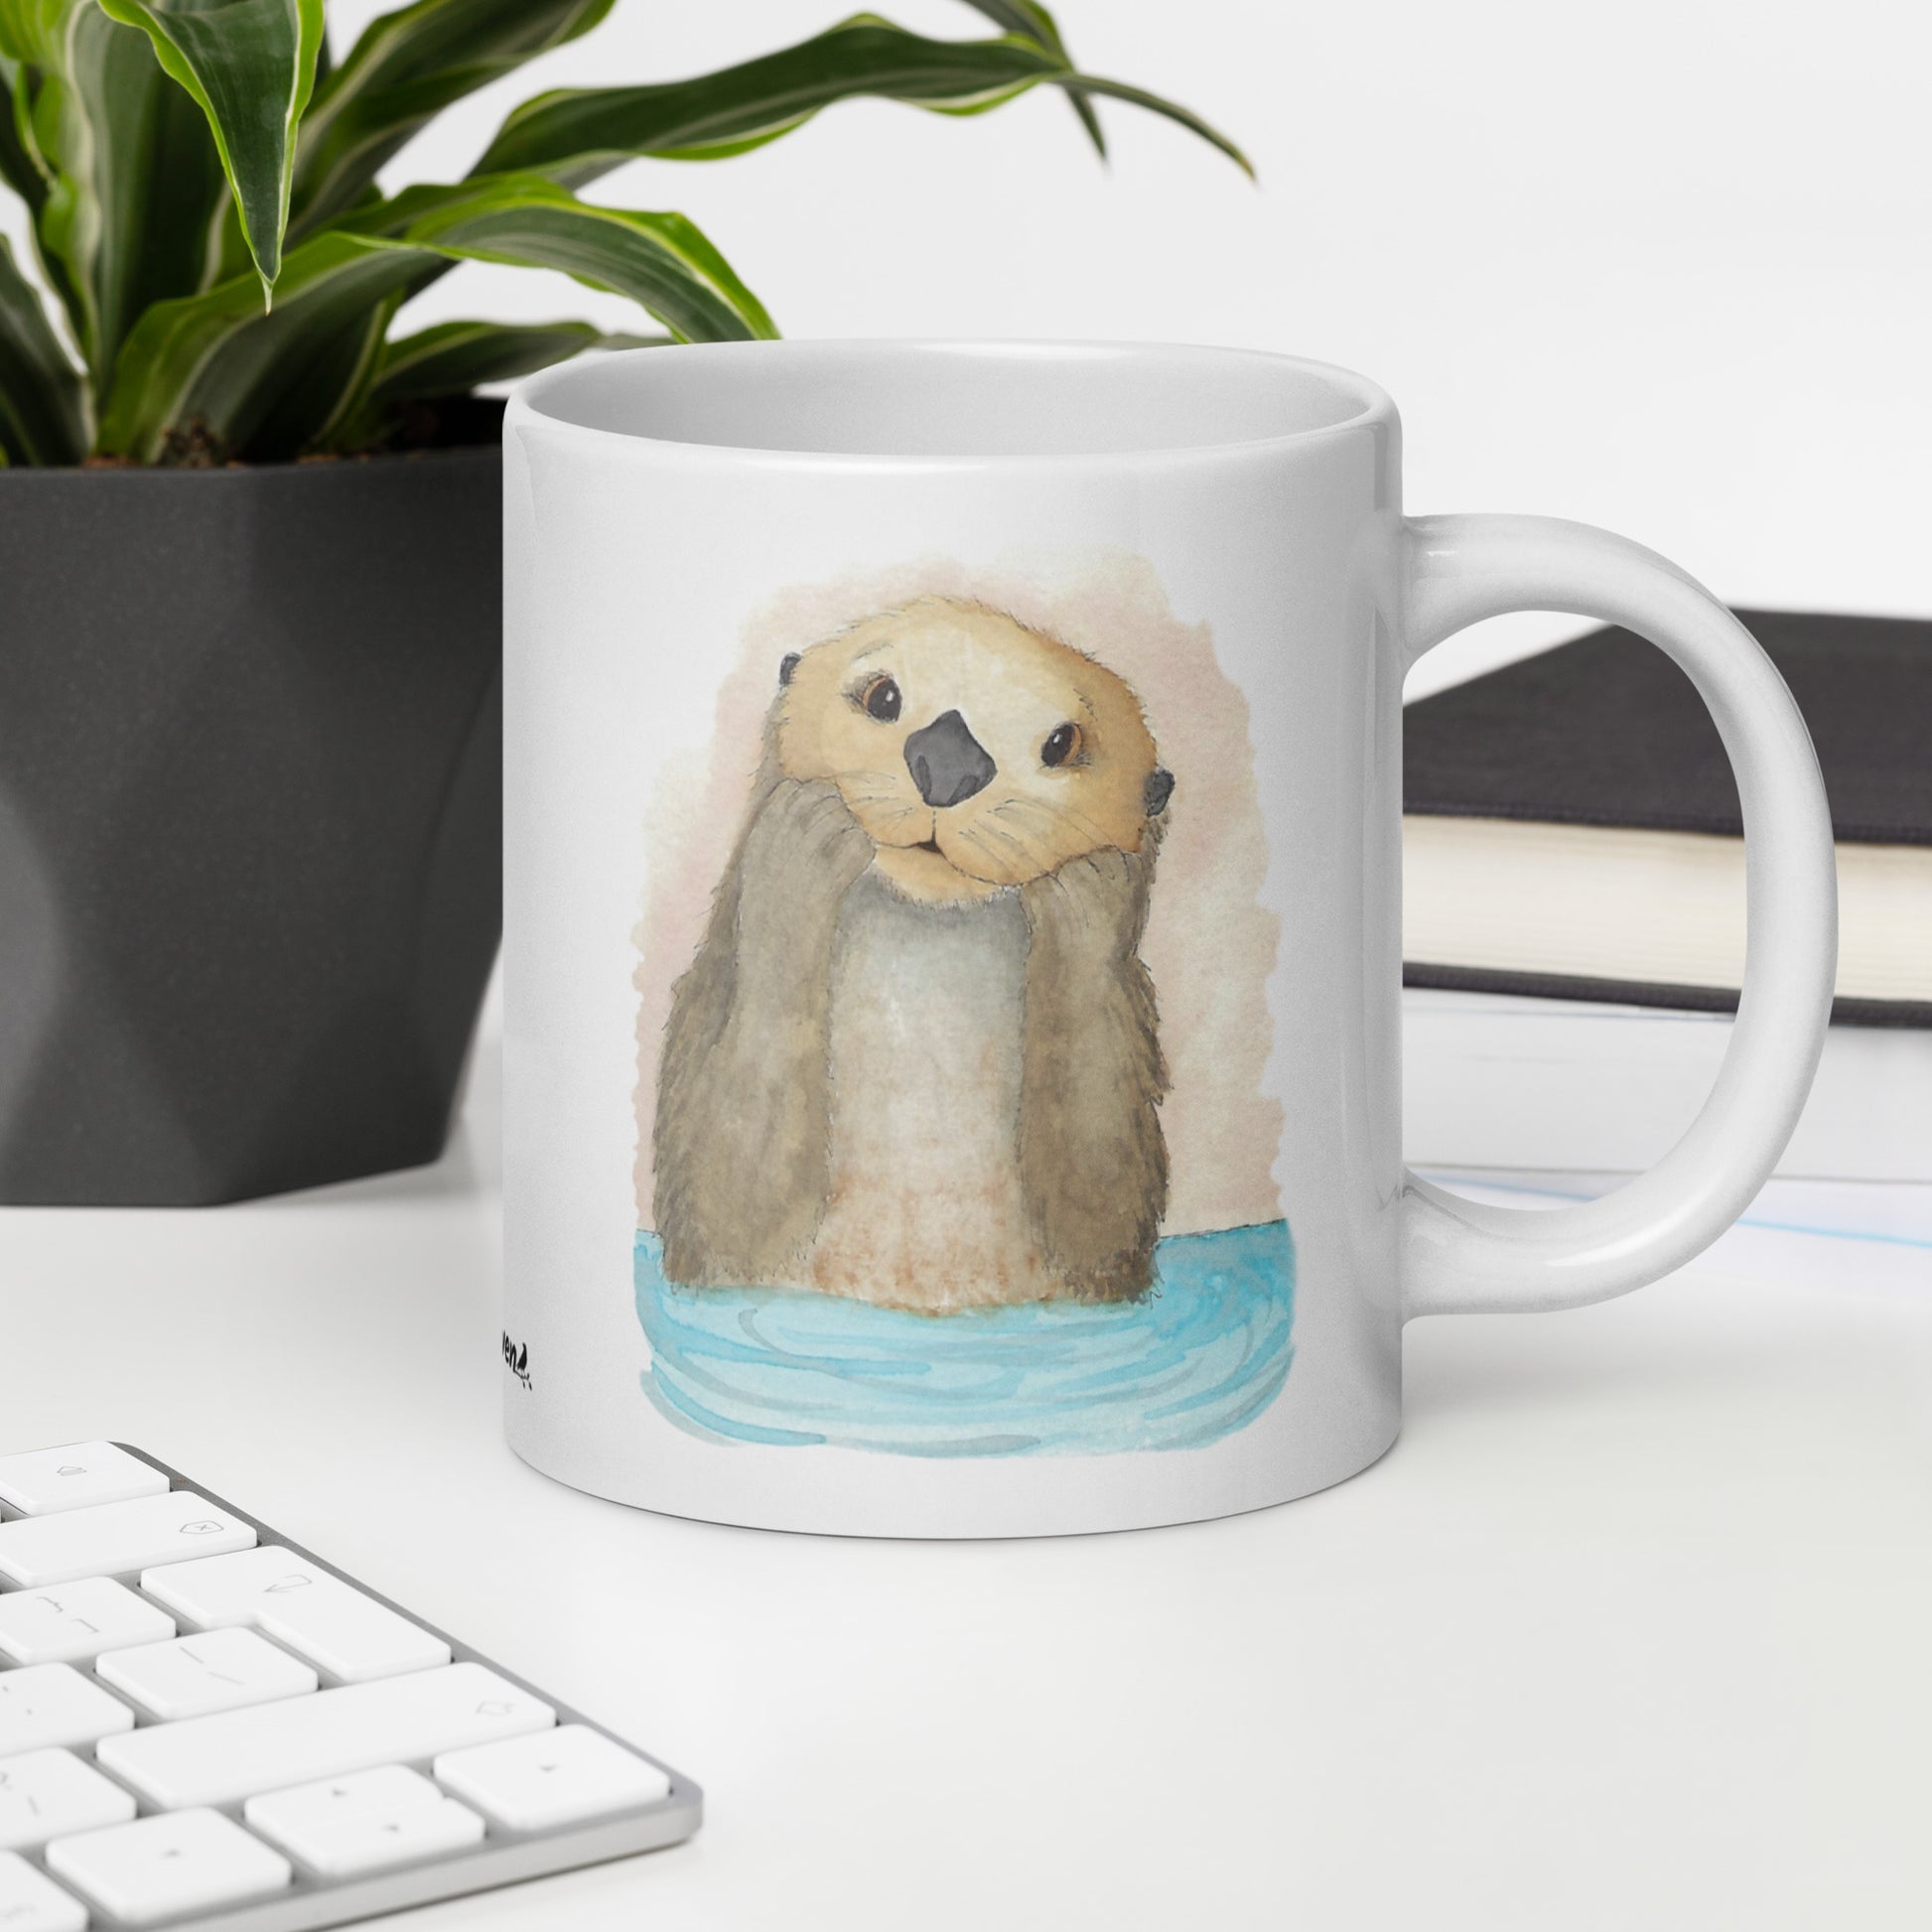 20 ounce white ceramic mug featuring watercolor print of a sea otter on both sides. Dishwasher and microwave safe. Shown on desk by keyboard, book, and potted plant.